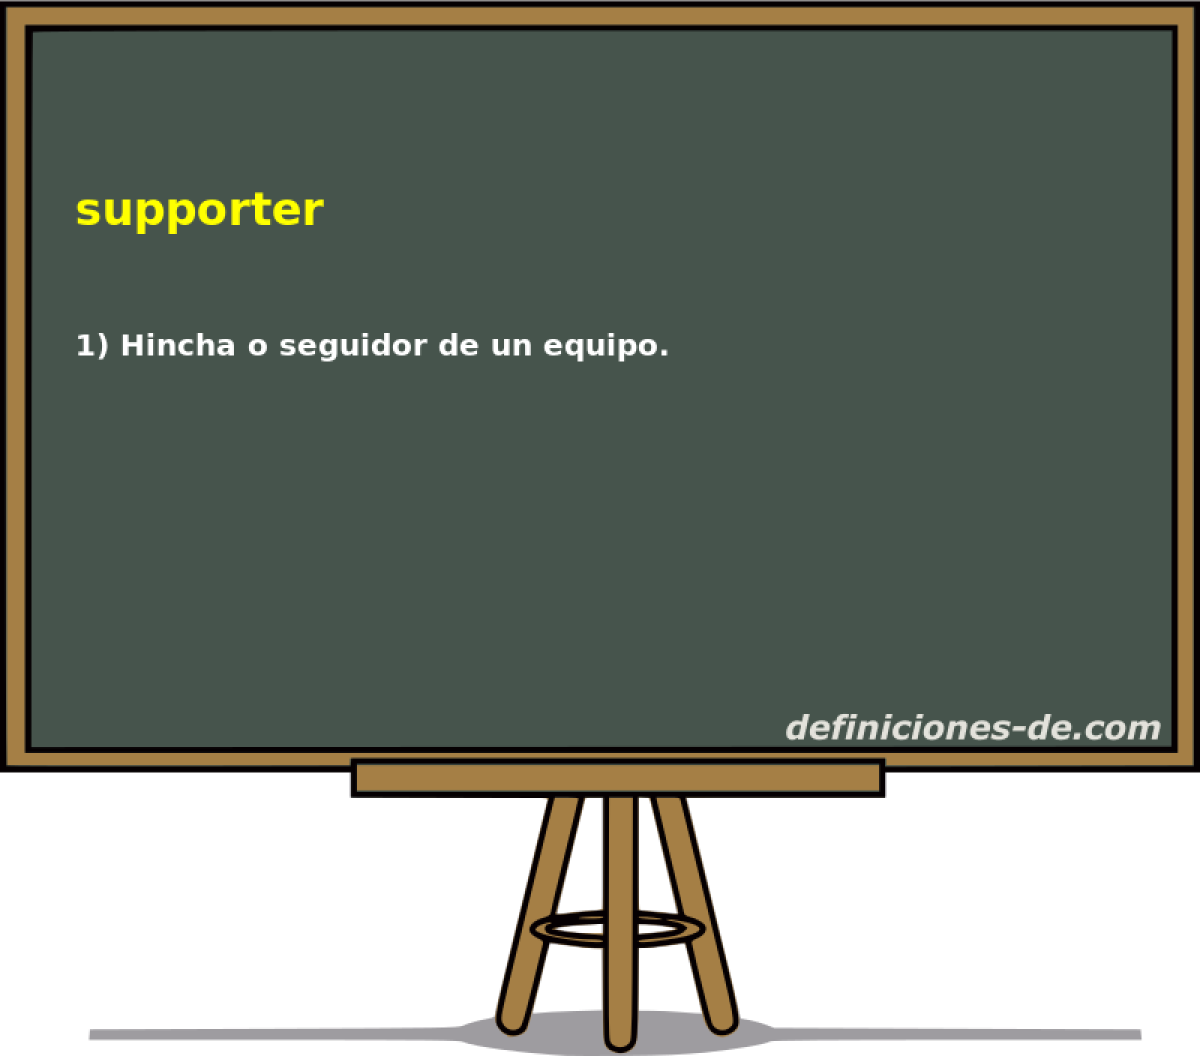 supporter 